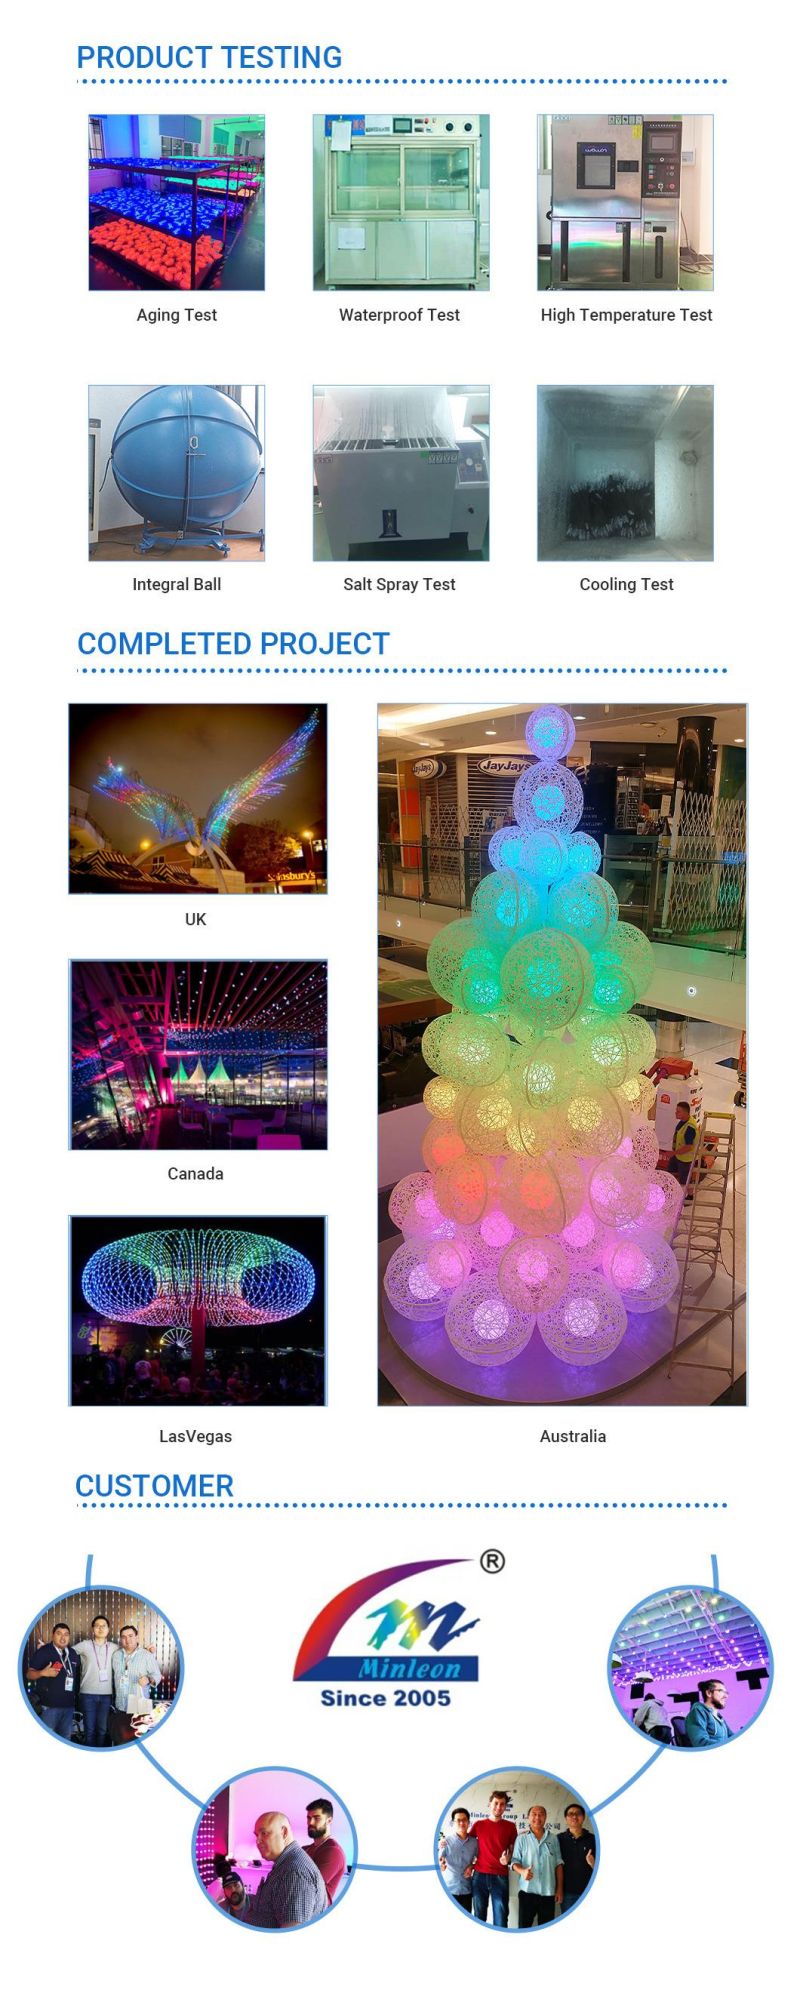 RGB Color Changing Christmas Tree with Remote Control